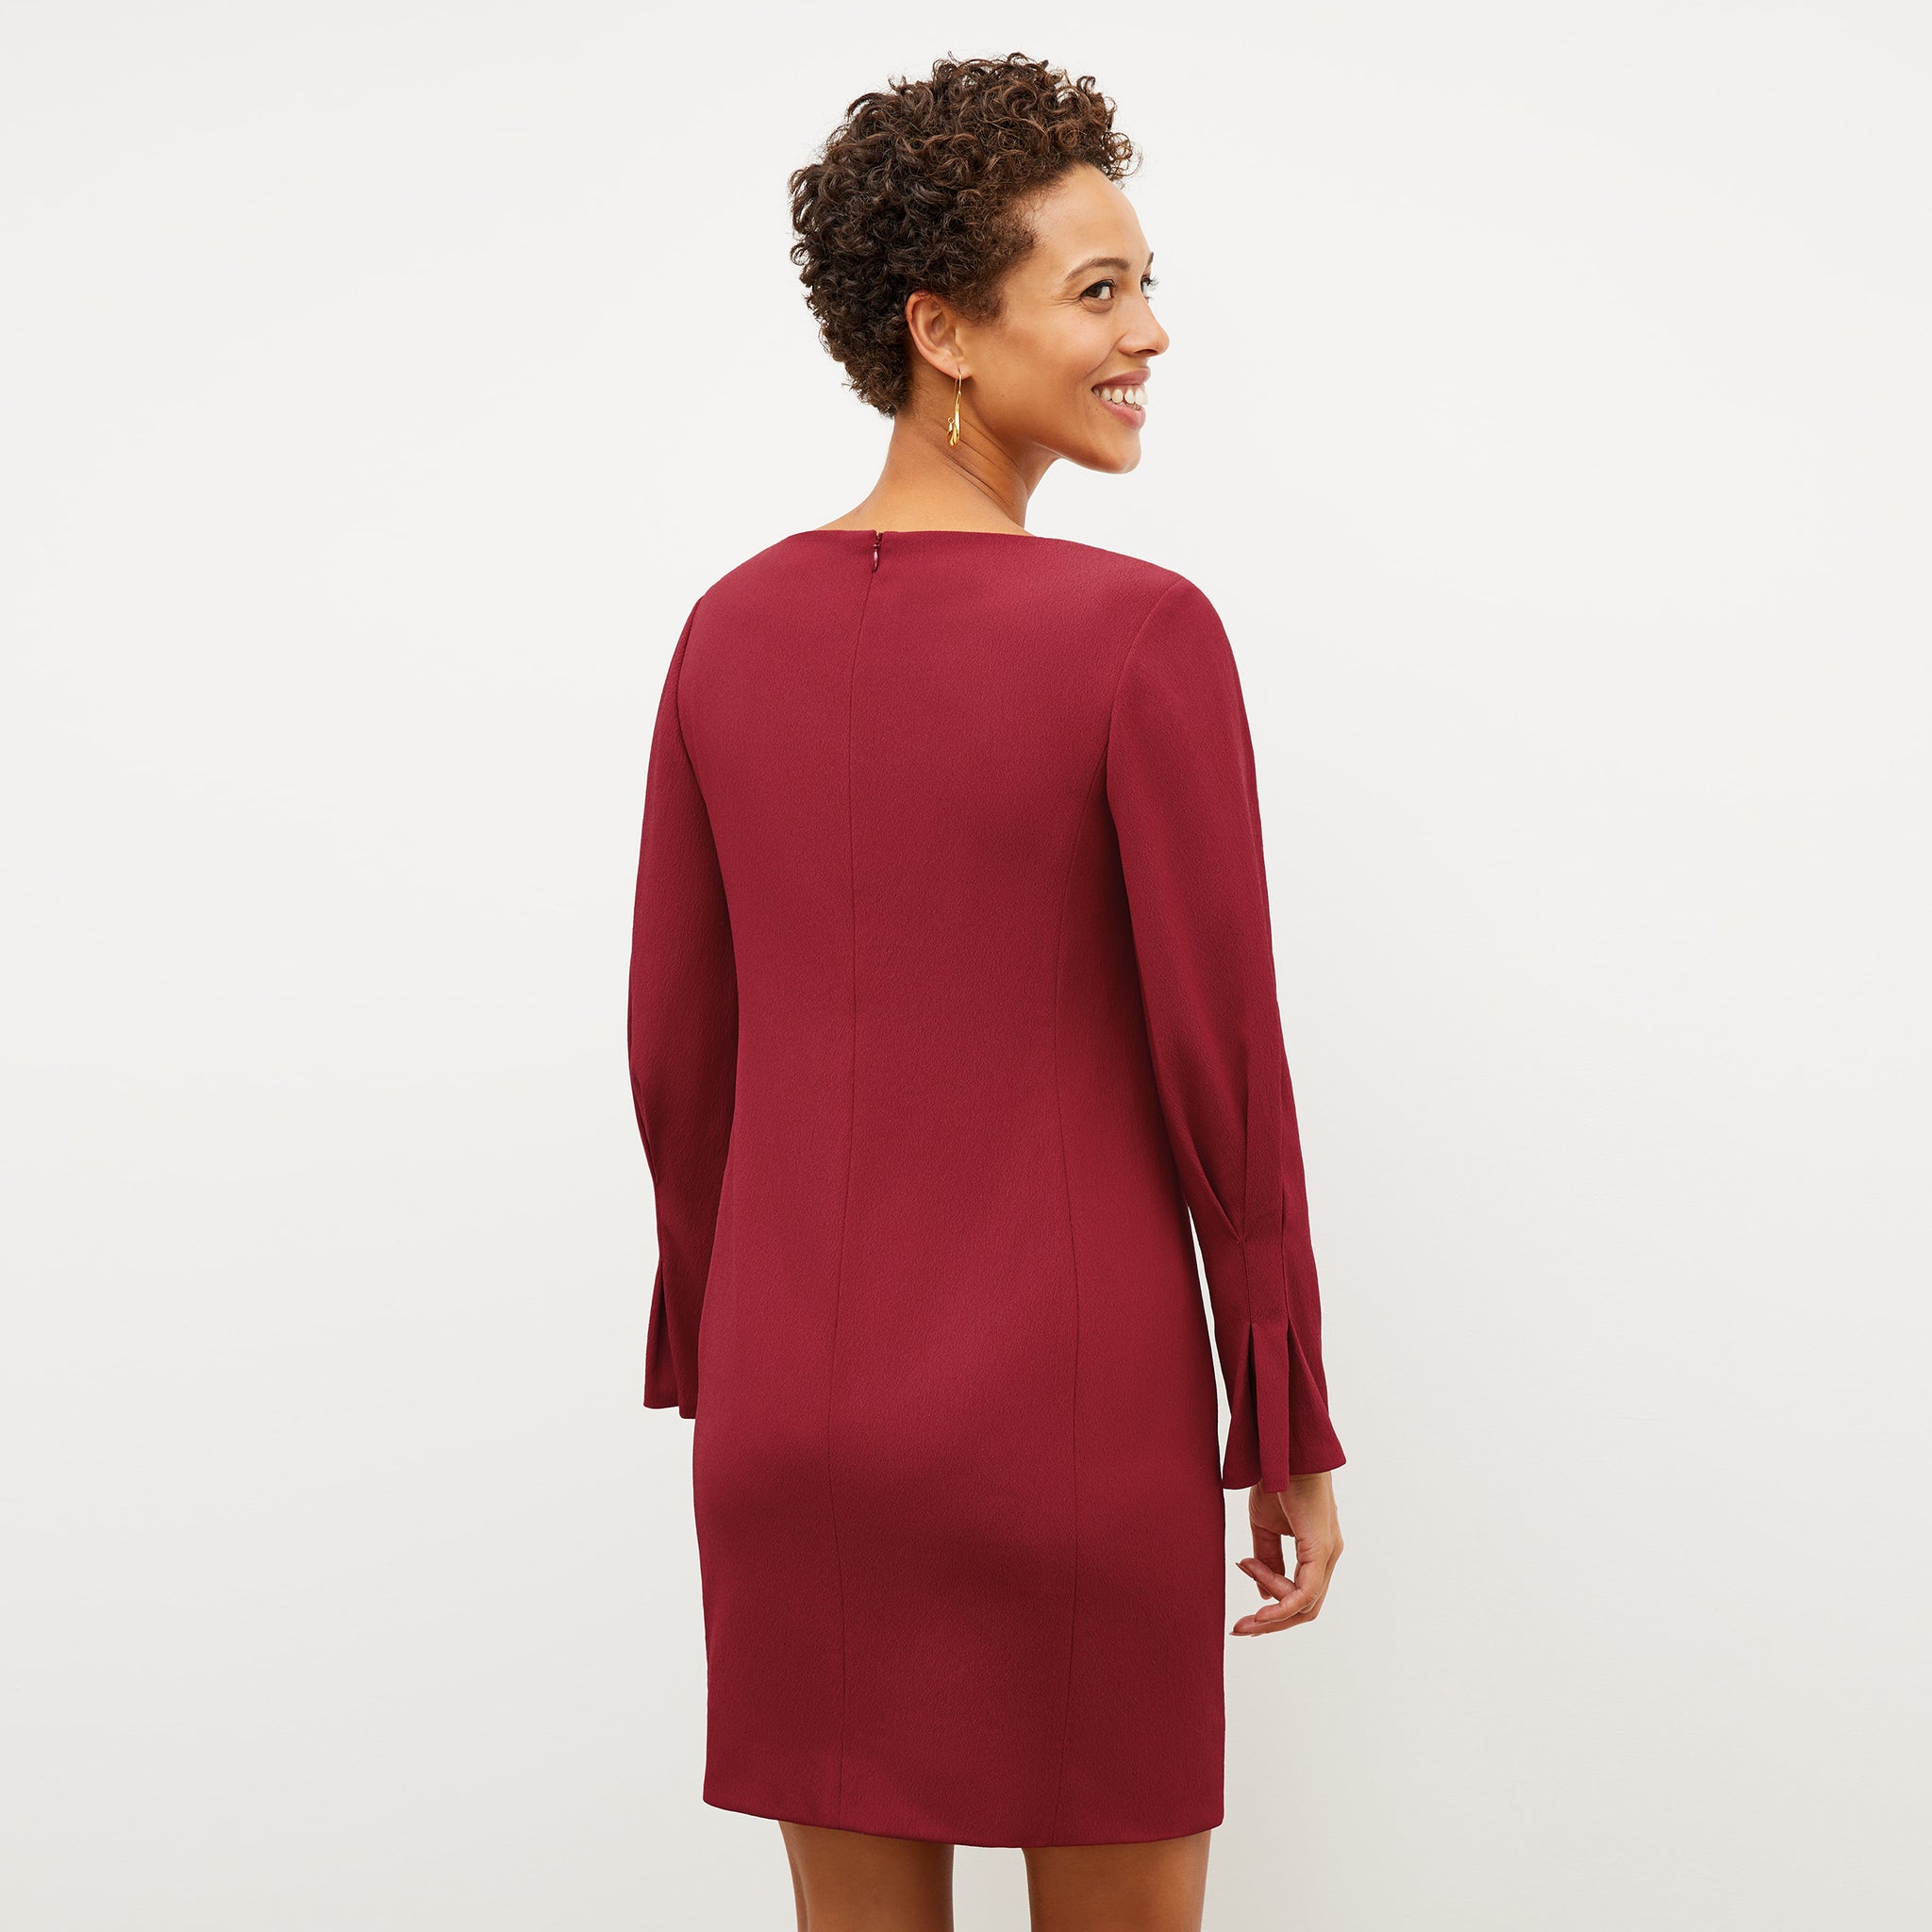 Back image of a woman wearing the regina dress in cerise